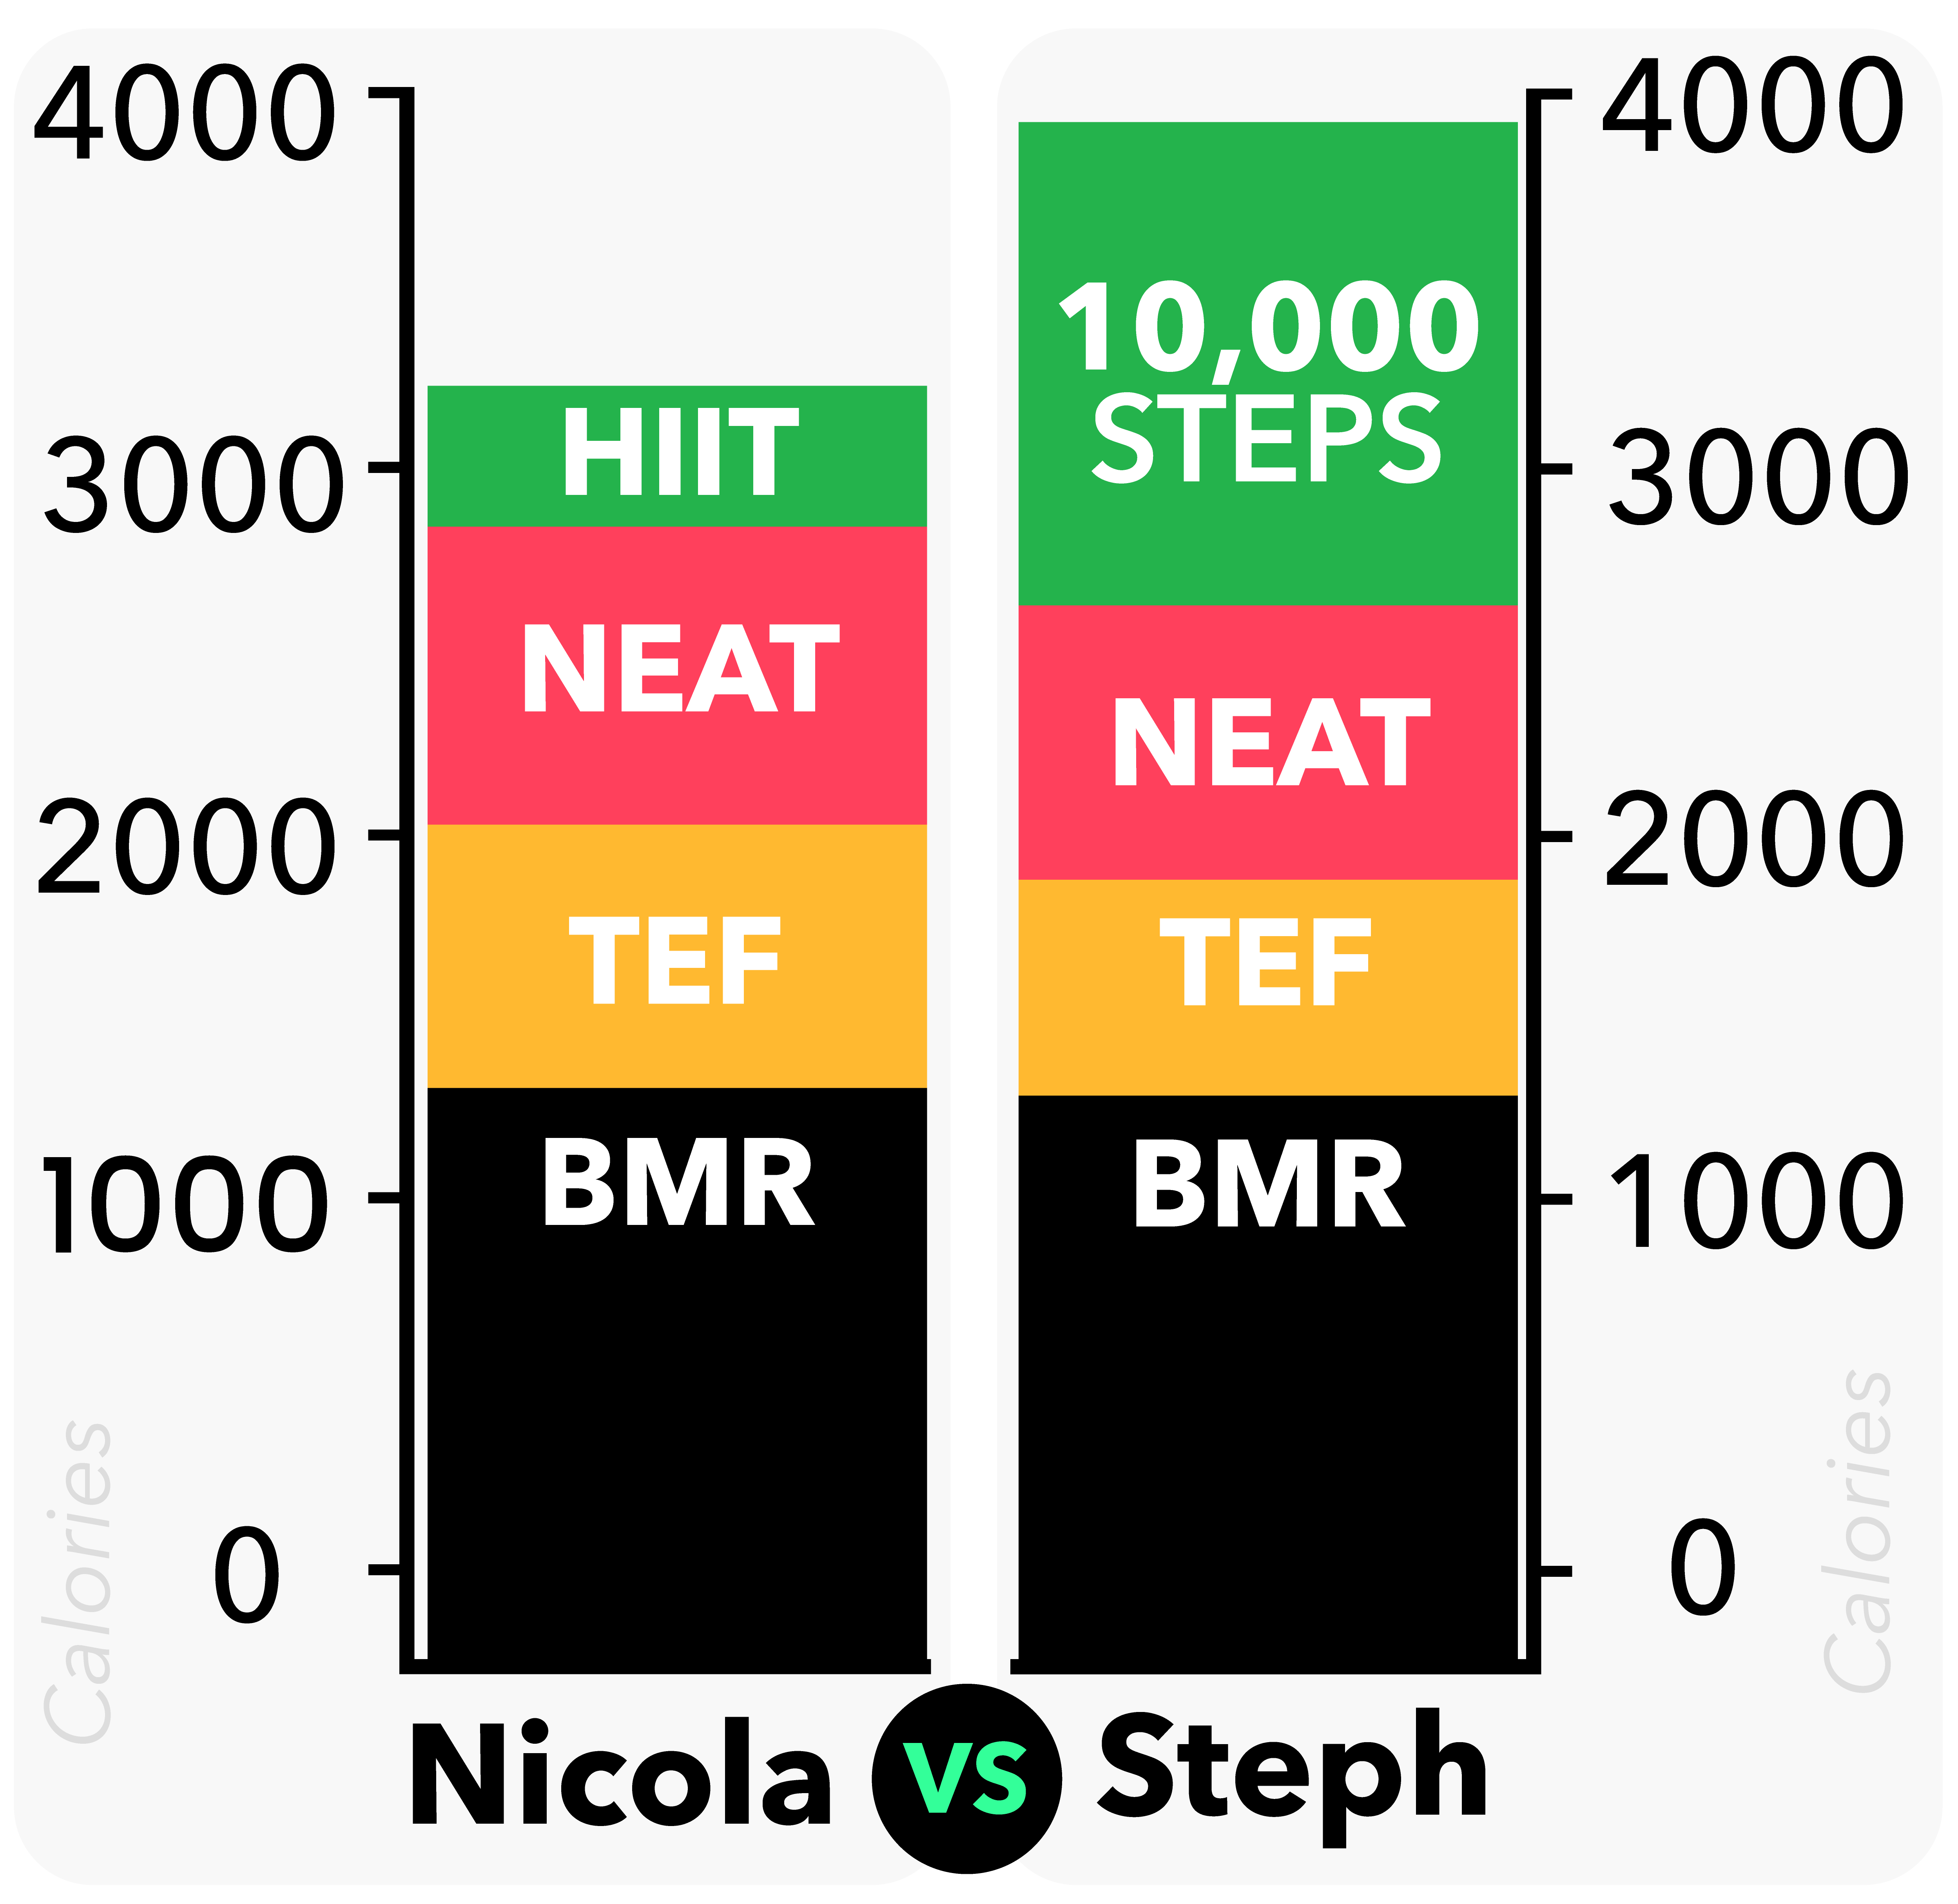 _HIIT cardio vs Steps for fat loss.png